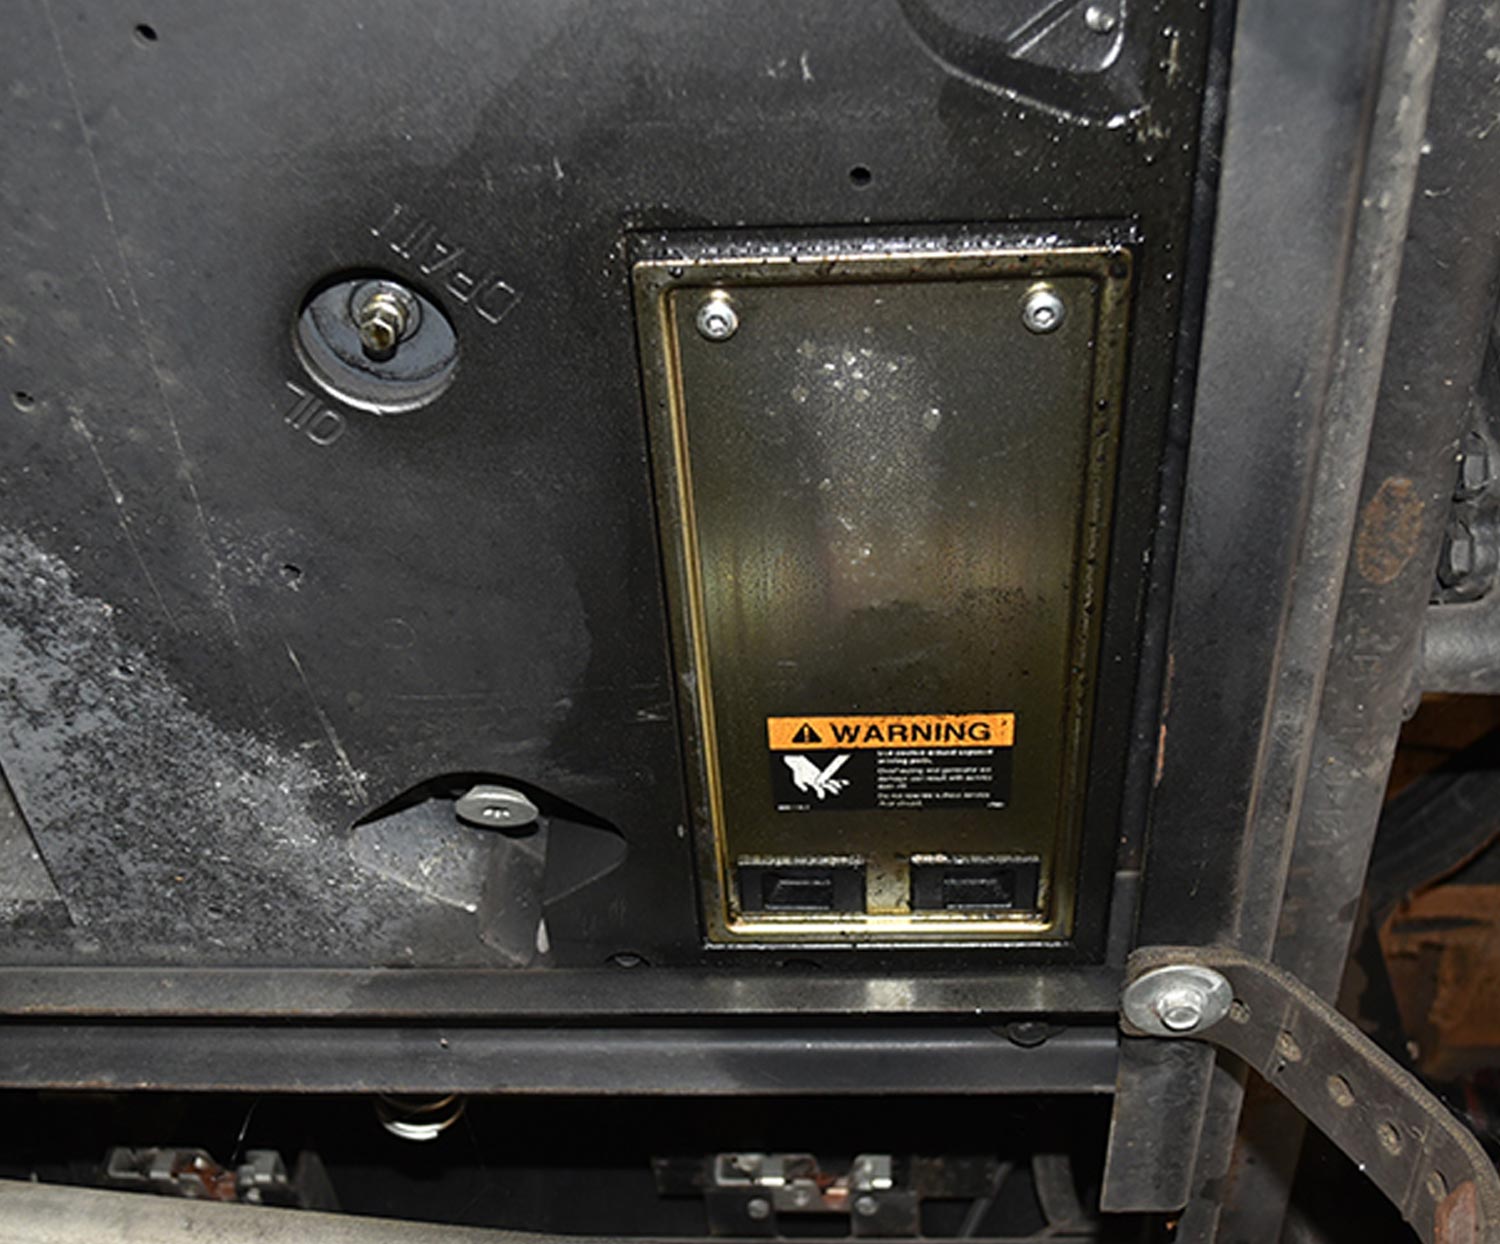 view of the gold-colored access panel near the oil drain opening